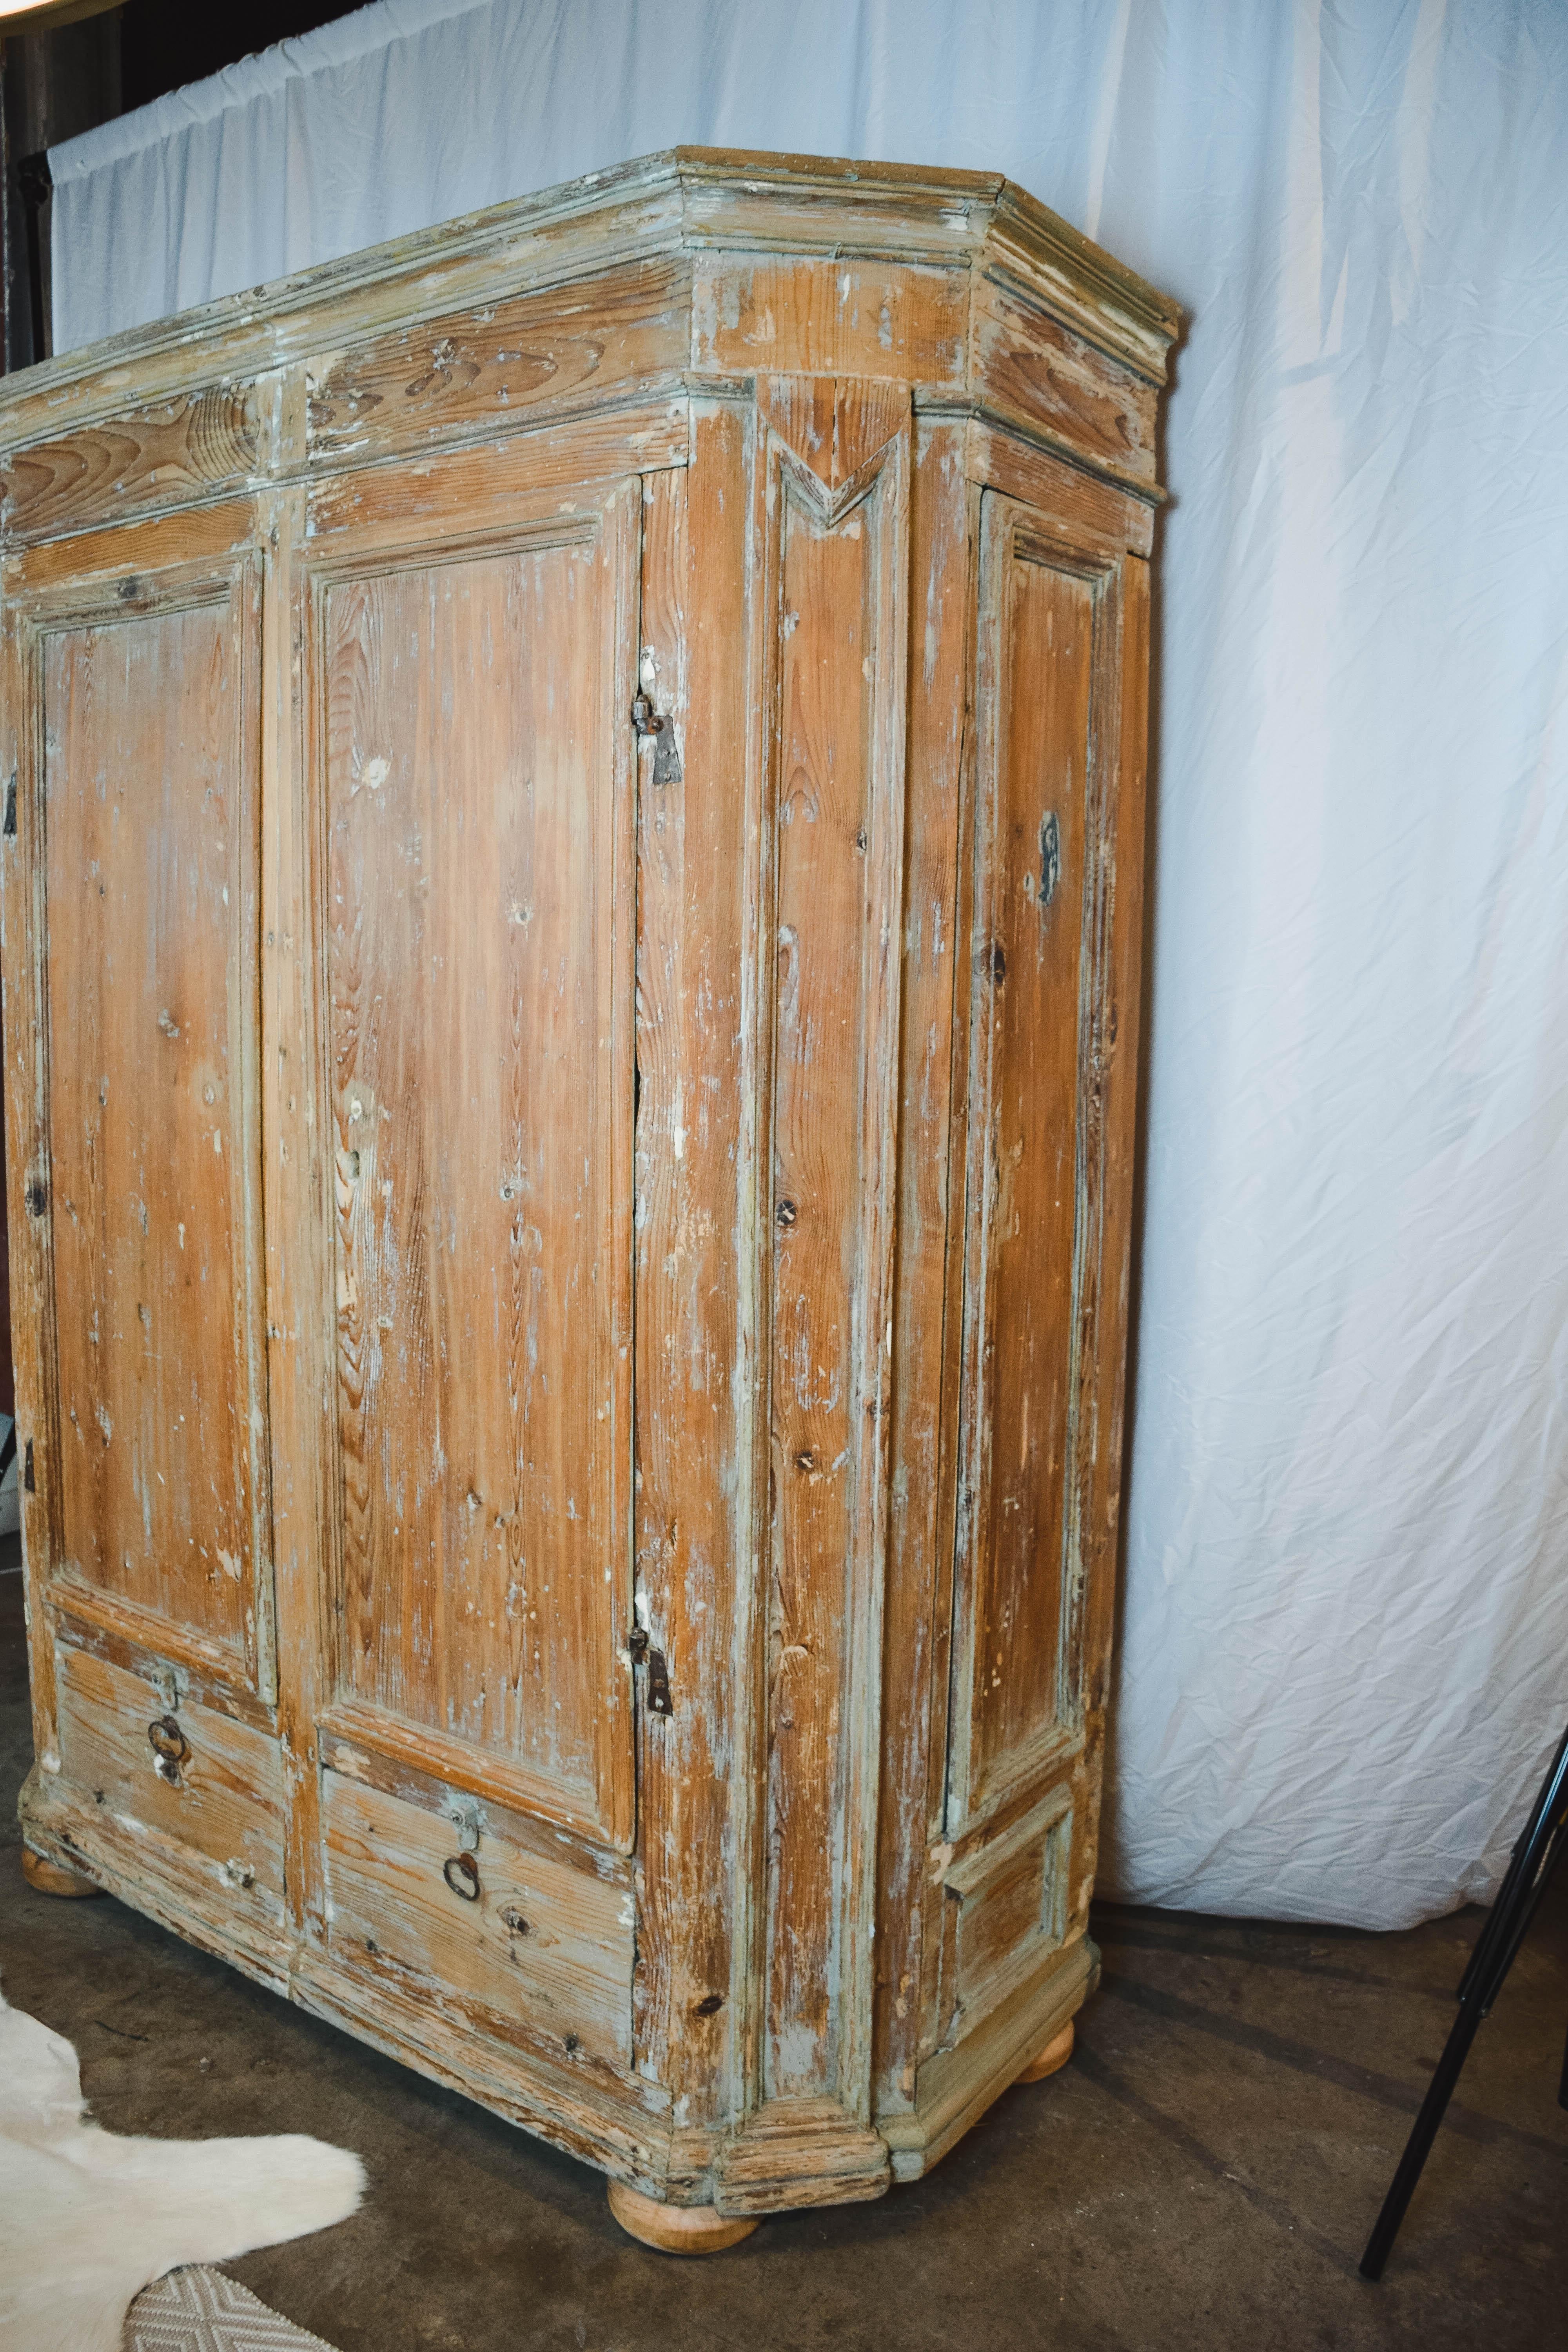 This 19th century Swedish armoire was handcrafted from solid pine, and features two large doors over two lower doors with hand forged pulls. The two lower doors appear to be drawers, however they lift up on hinges. The wardrobe has tailored molding